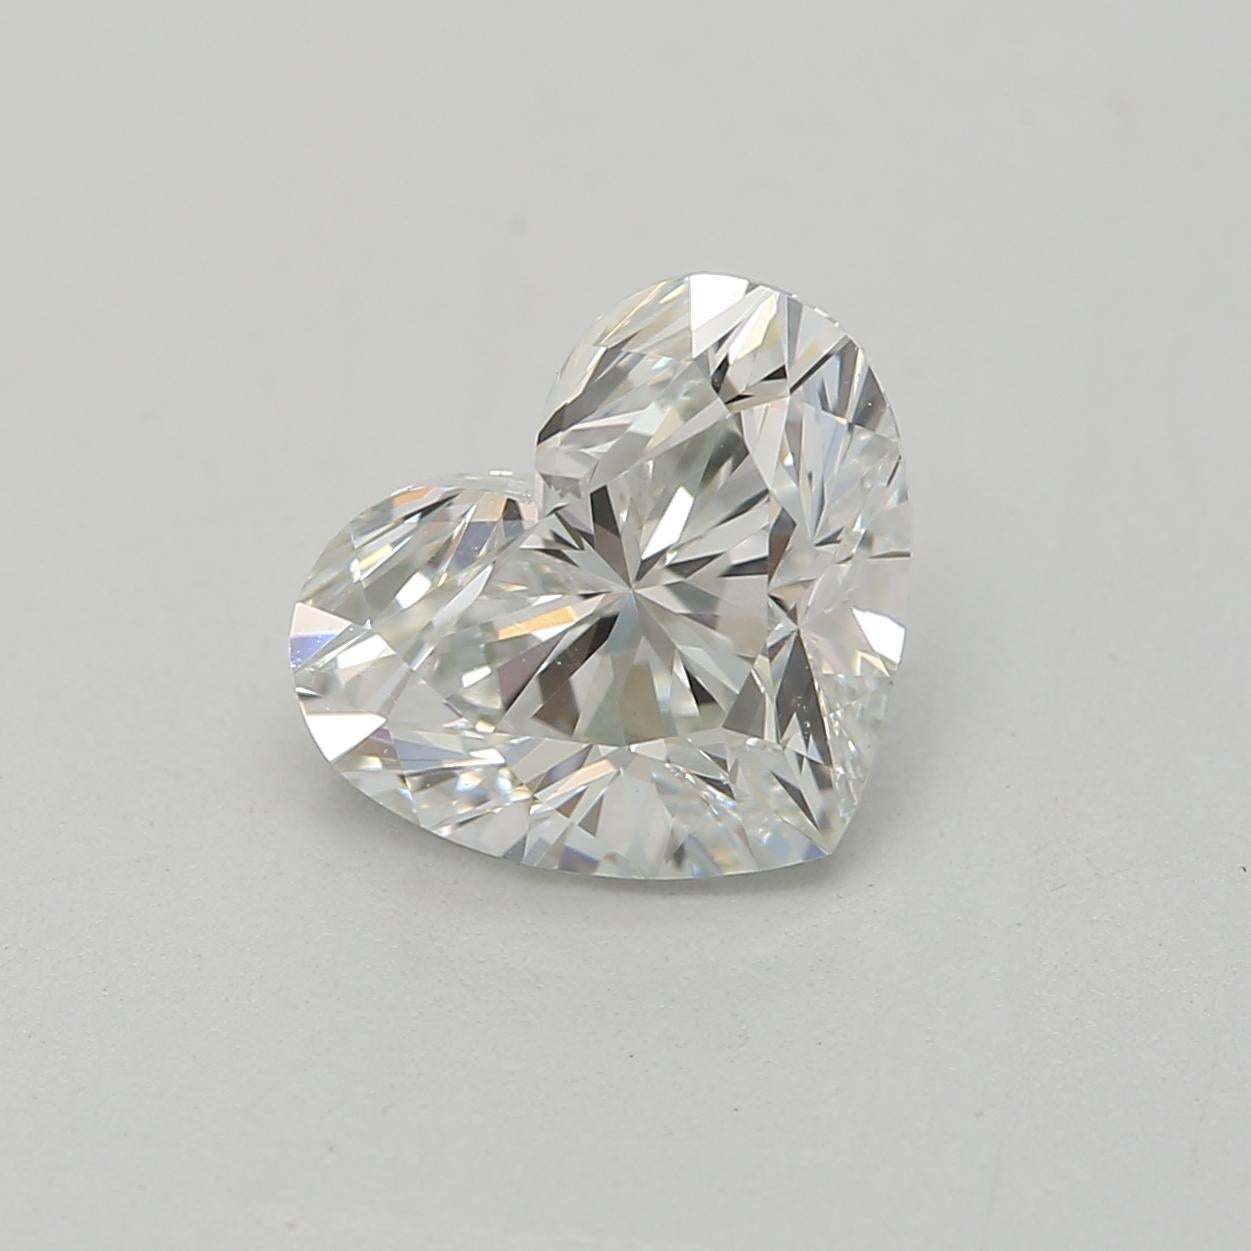 **100% NATURAL FANCY COLOUR DIAMOND**

✪ Diamond Details ✪

➛ Shape: Heart
➛ Colour Grade: Very Light Green
➛ Carat: 1.00
➛ Clarity: VS1
➛ GIA Certified 

^FEATURES OF THE DIAMOND^

This 1-carat diamond weighs approximately 200 milligrams. This size